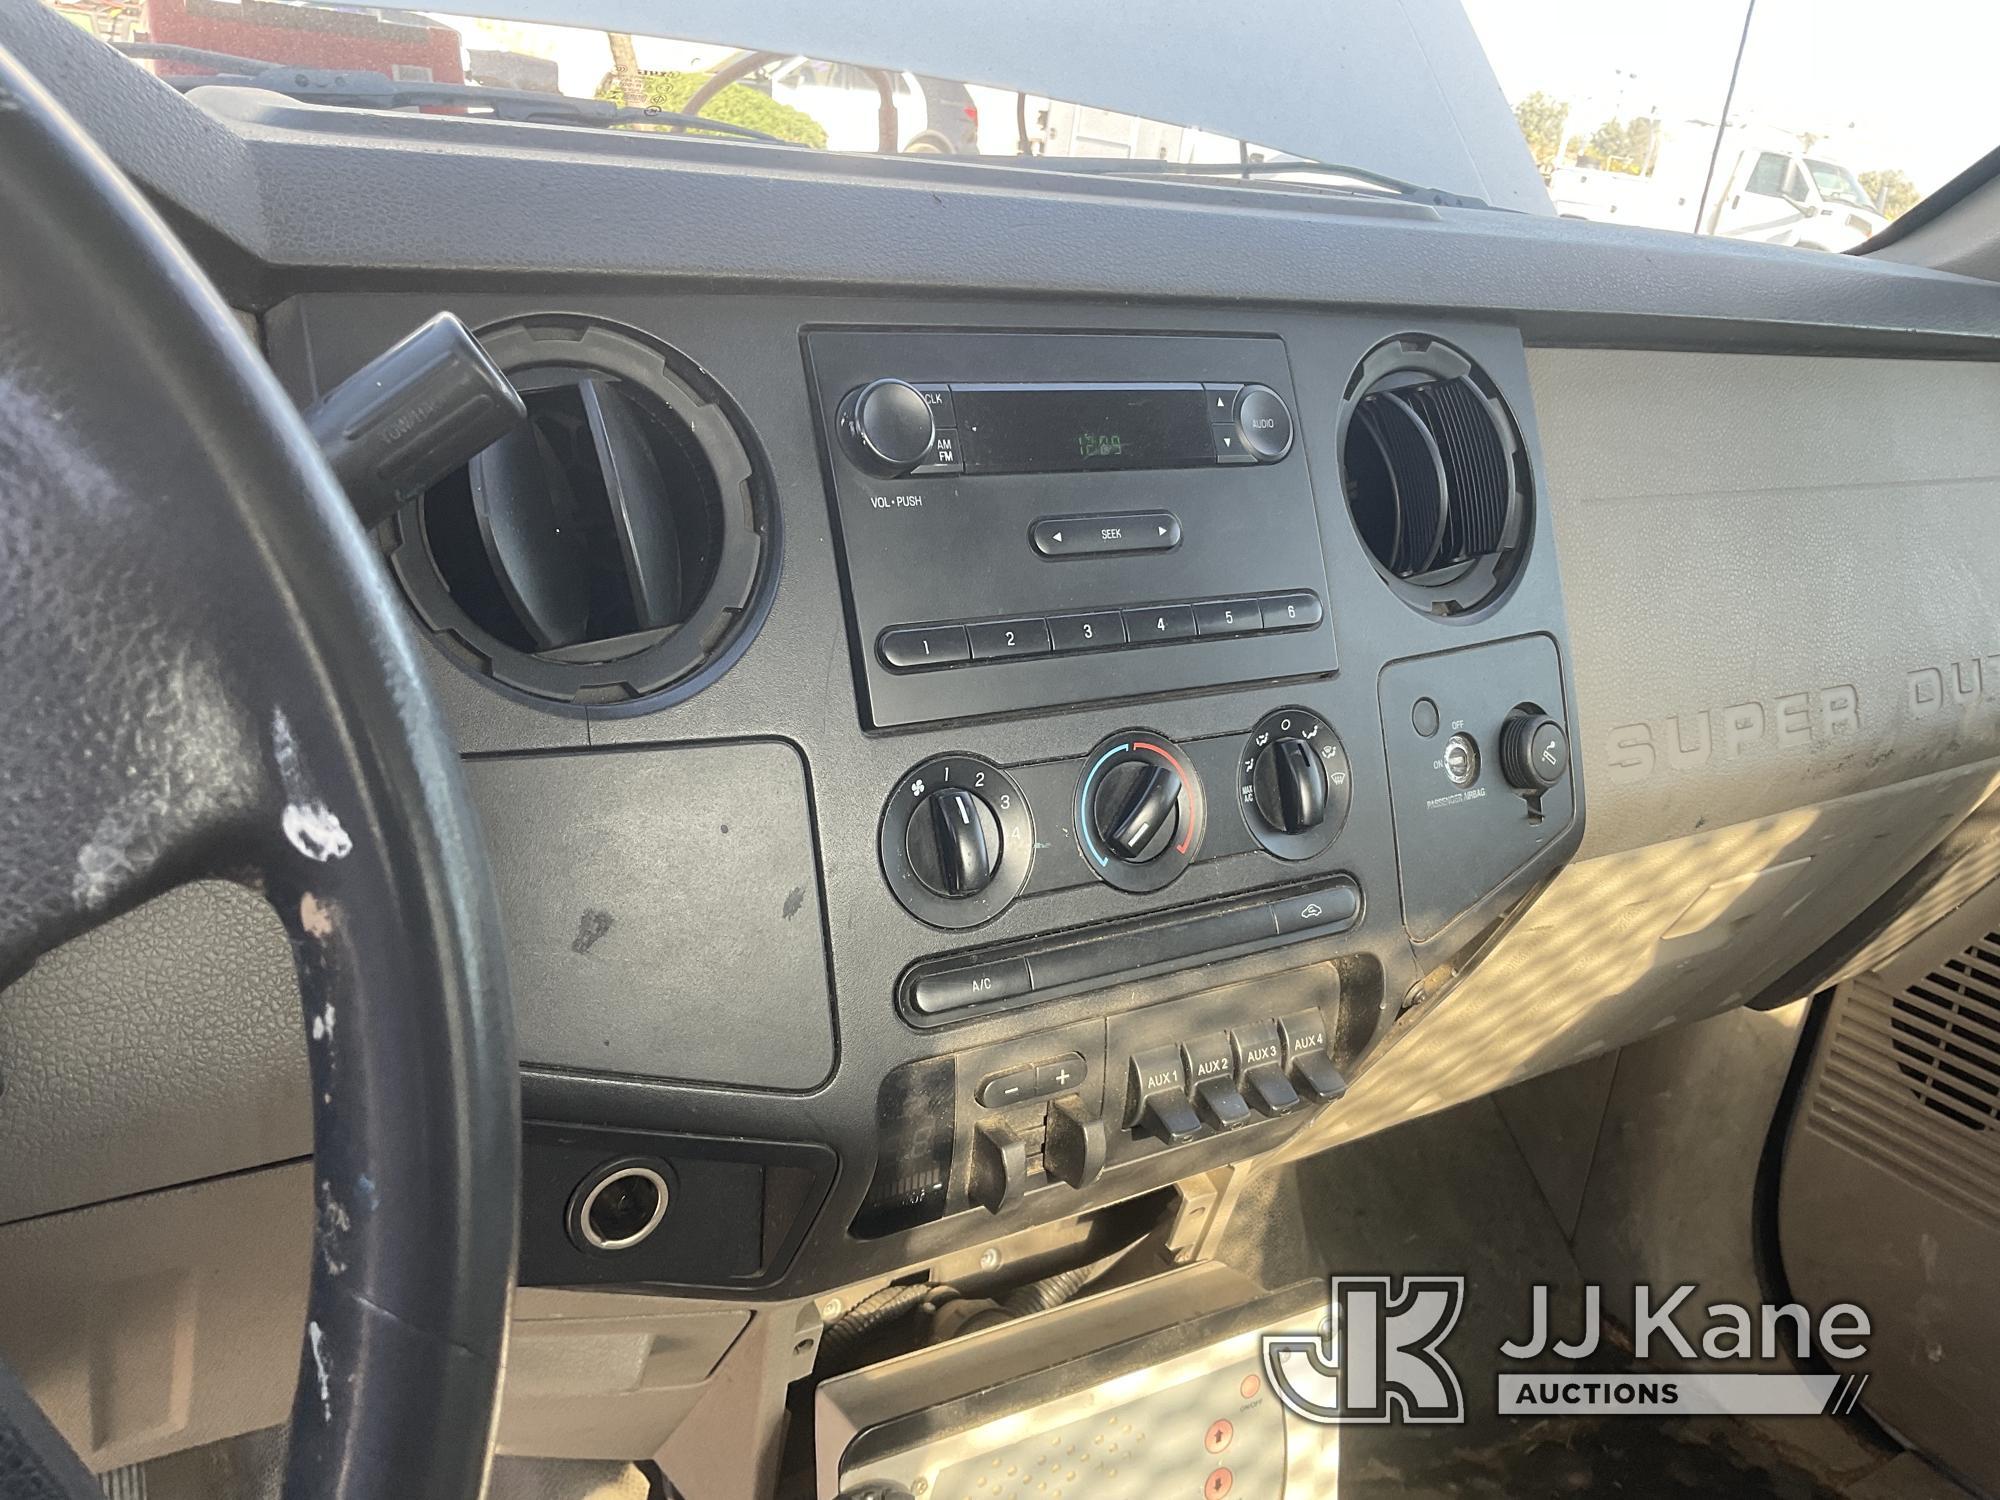 (Jurupa Valley, CA) 2008 Ford F-350 SD Cab & Chassis Does Not Stay Running Without Jumper